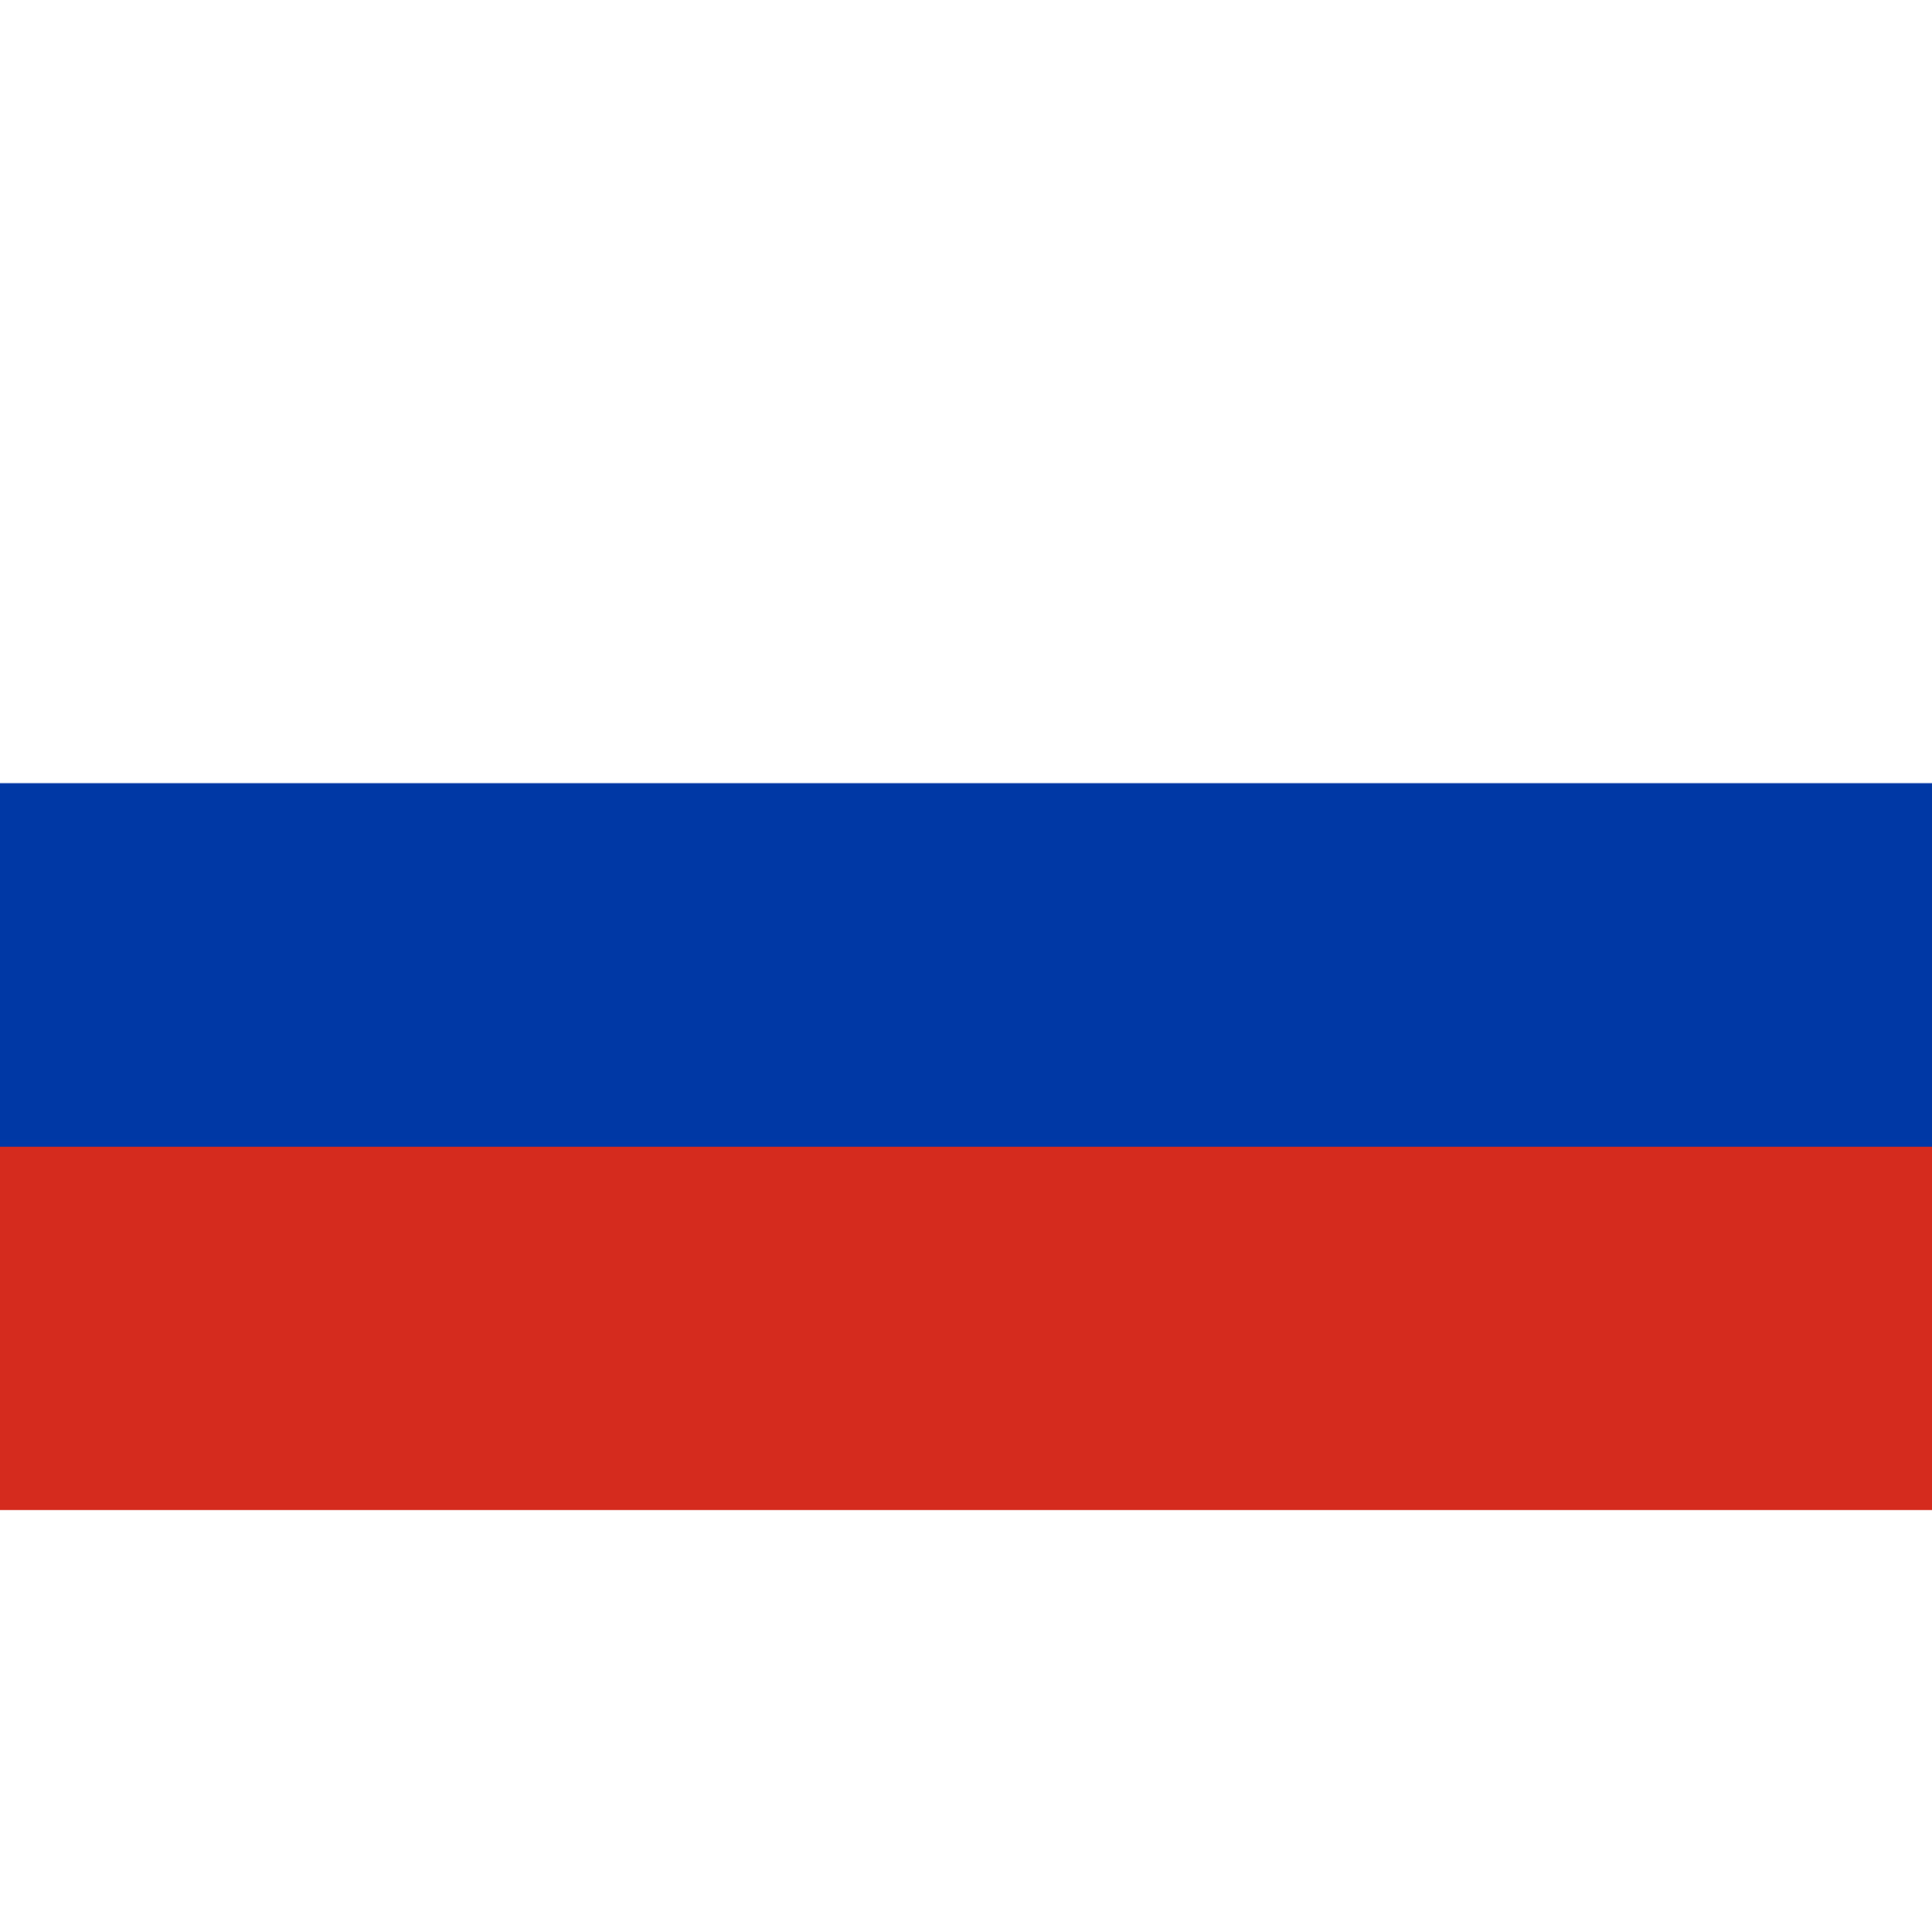 The Russian flag is made up of 3 equal horizontal stripes in white on the top, blue in the middle and red at the bottom. 